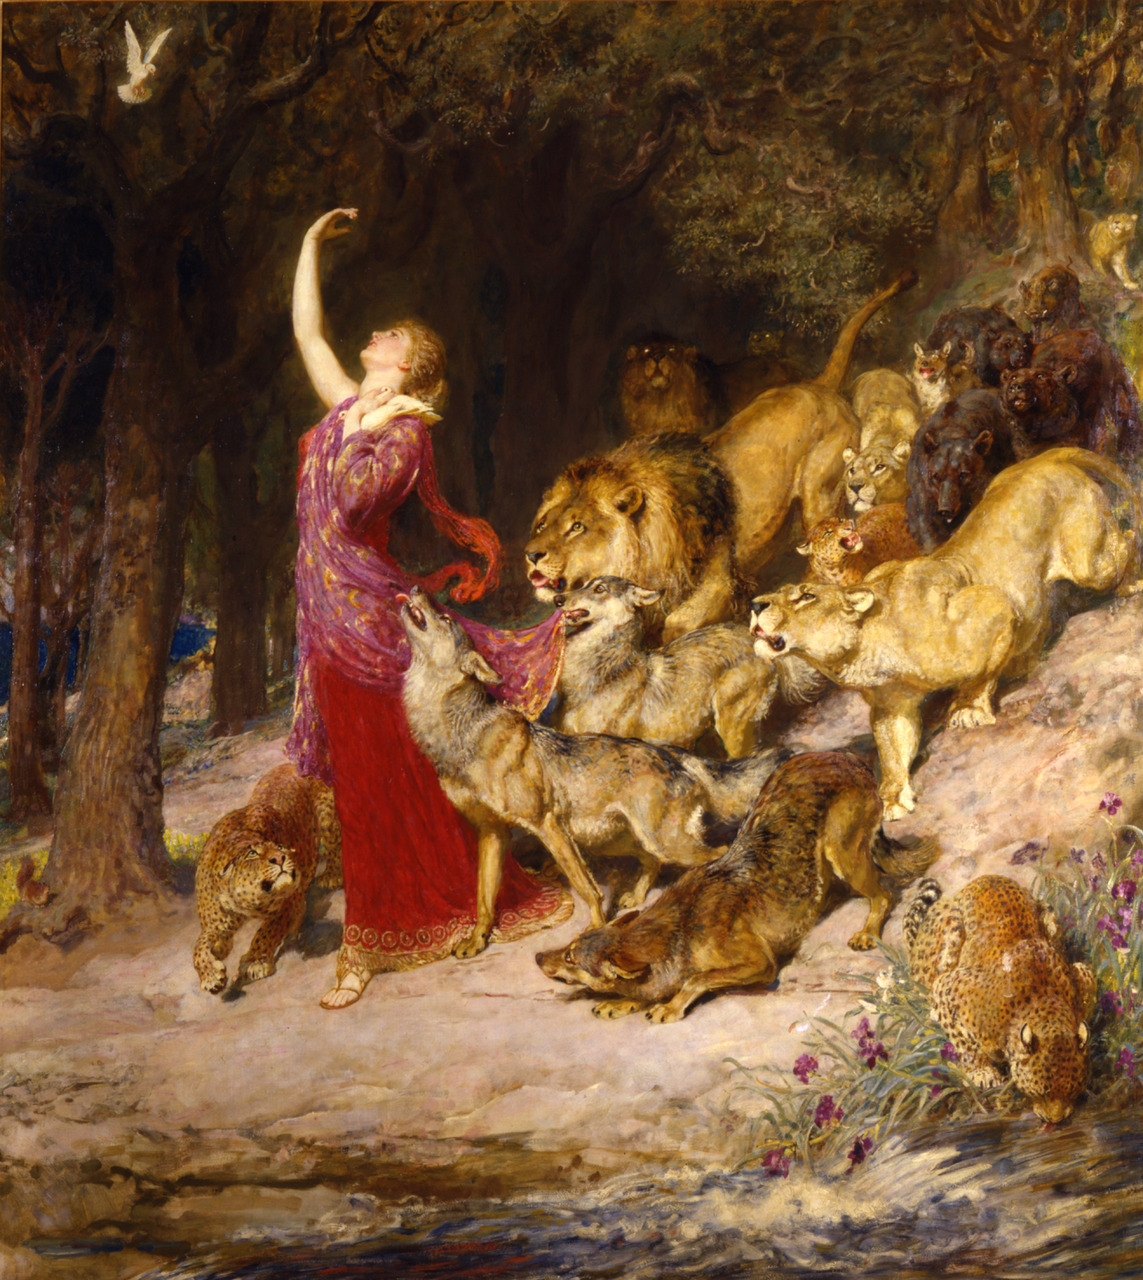 A painting of Aphrodite surrounded by nature and animals.